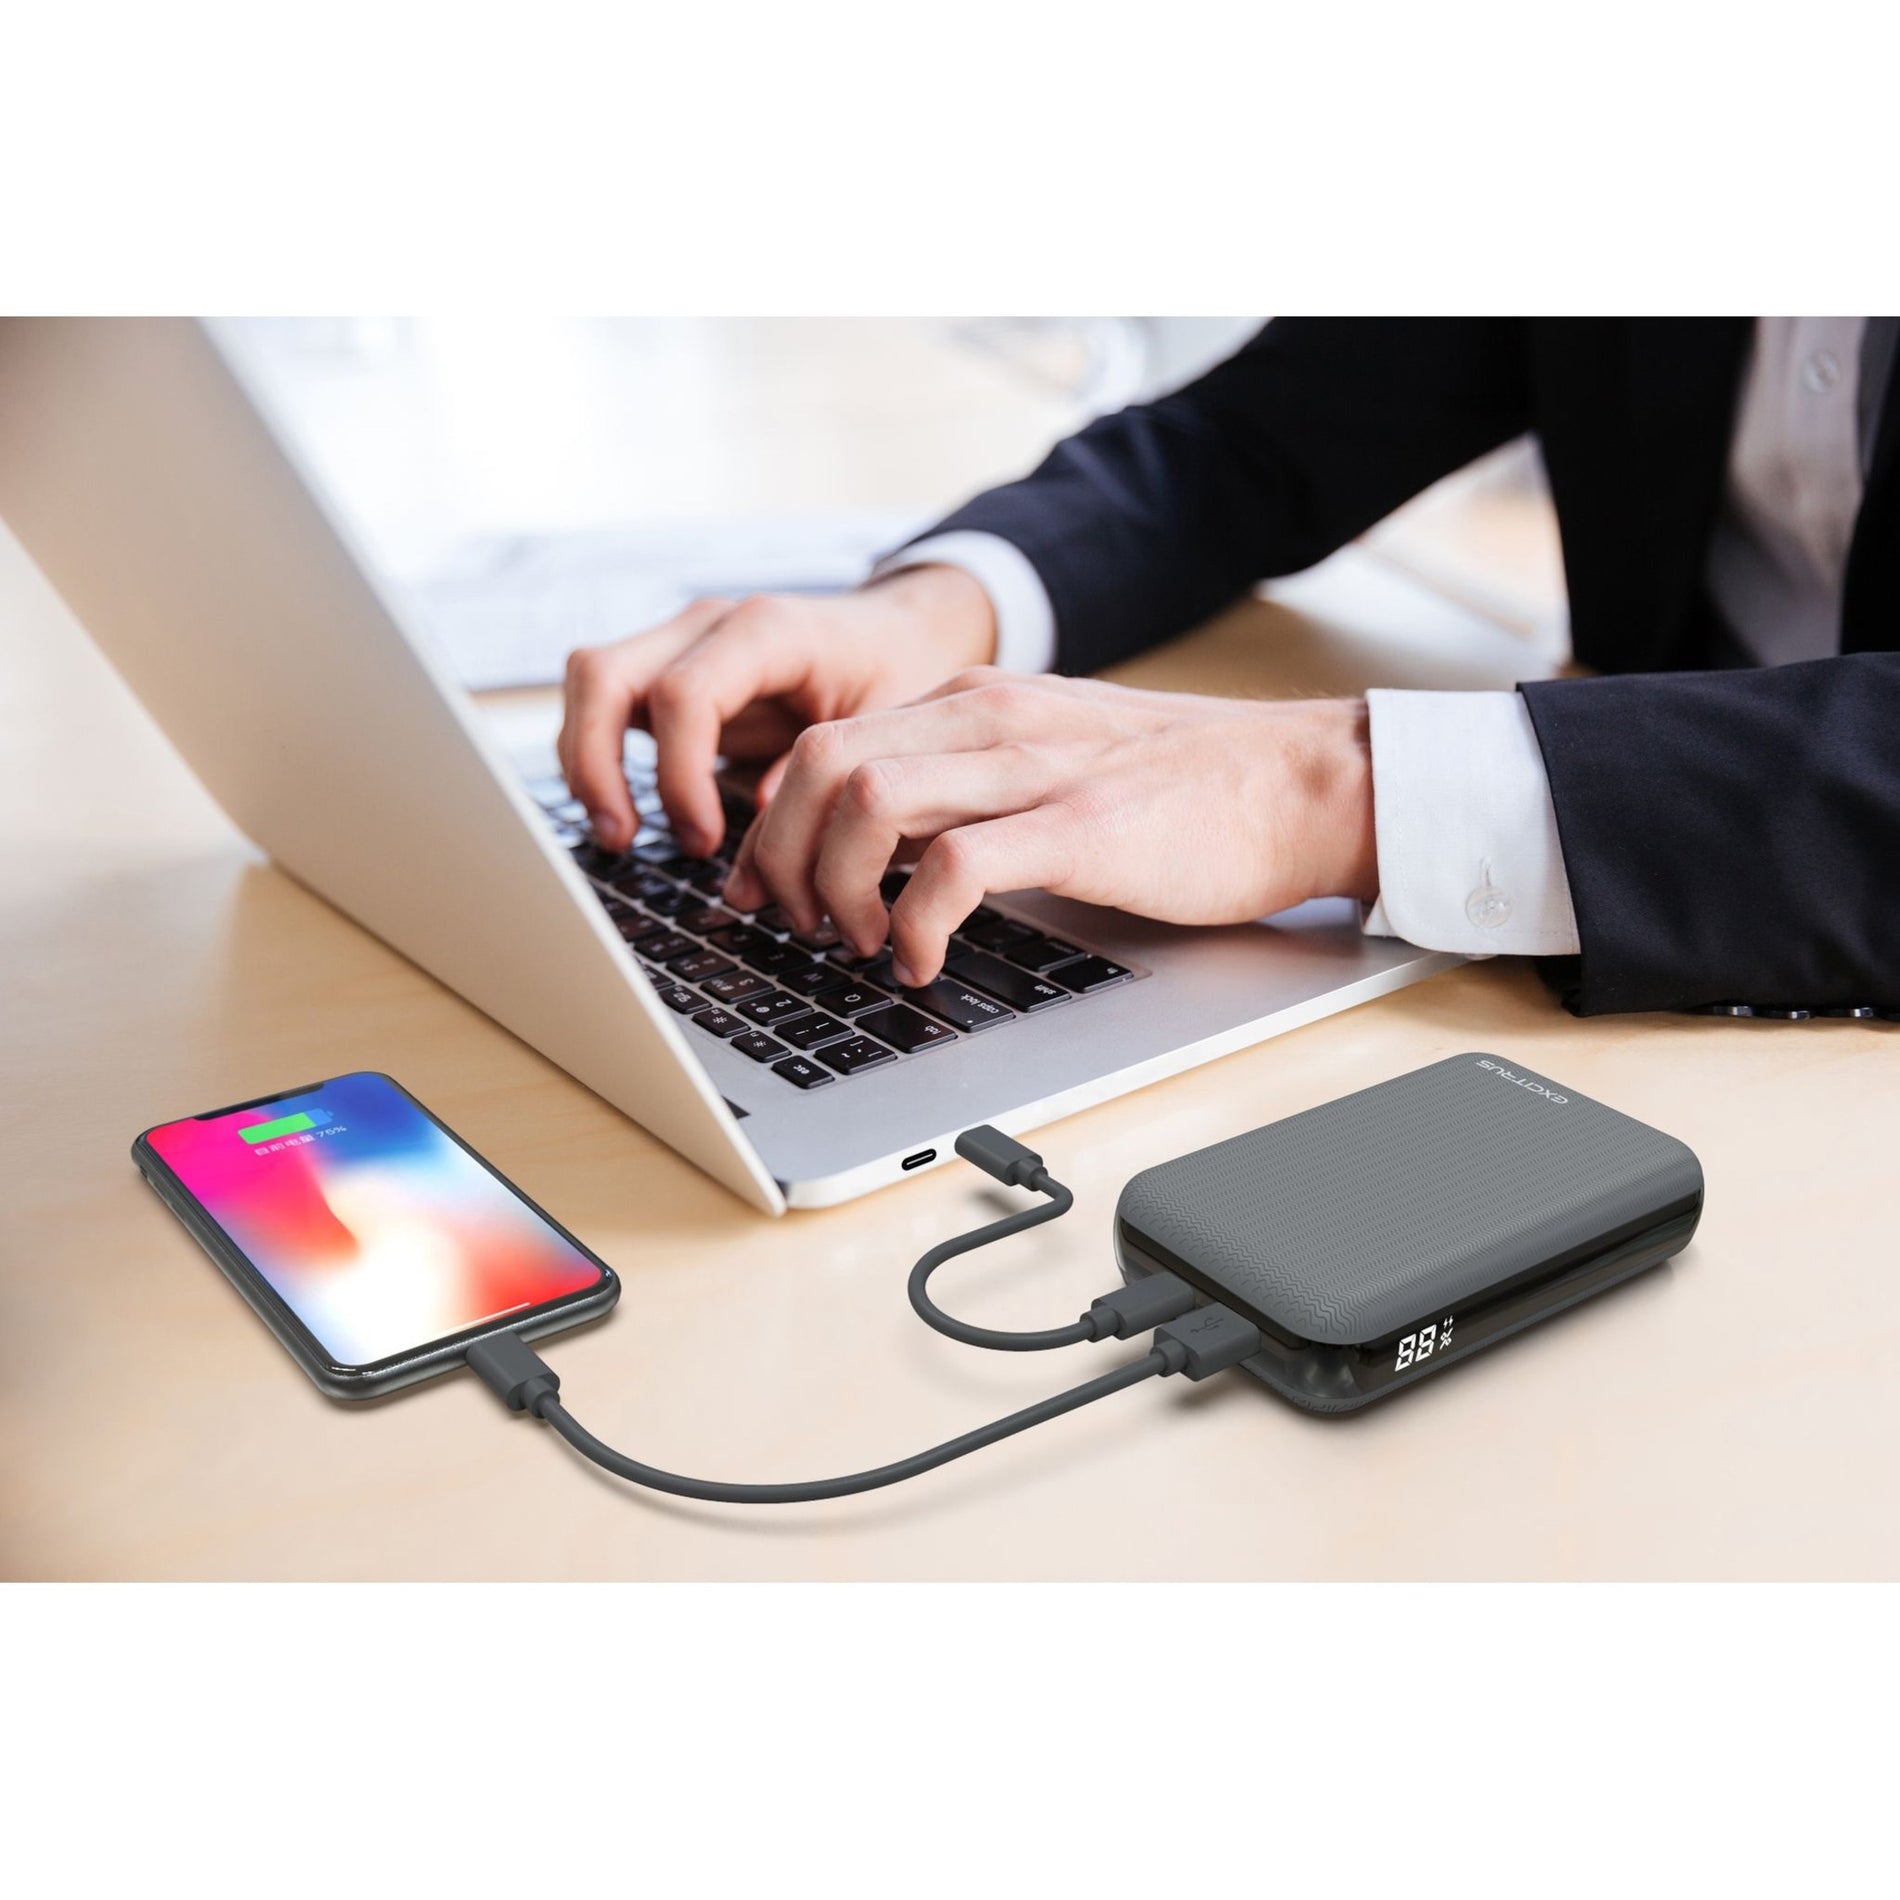 EXCITRUS PD-65135 83W Power Bank Pro, Extremely Fast Charging Laptop Power Bank